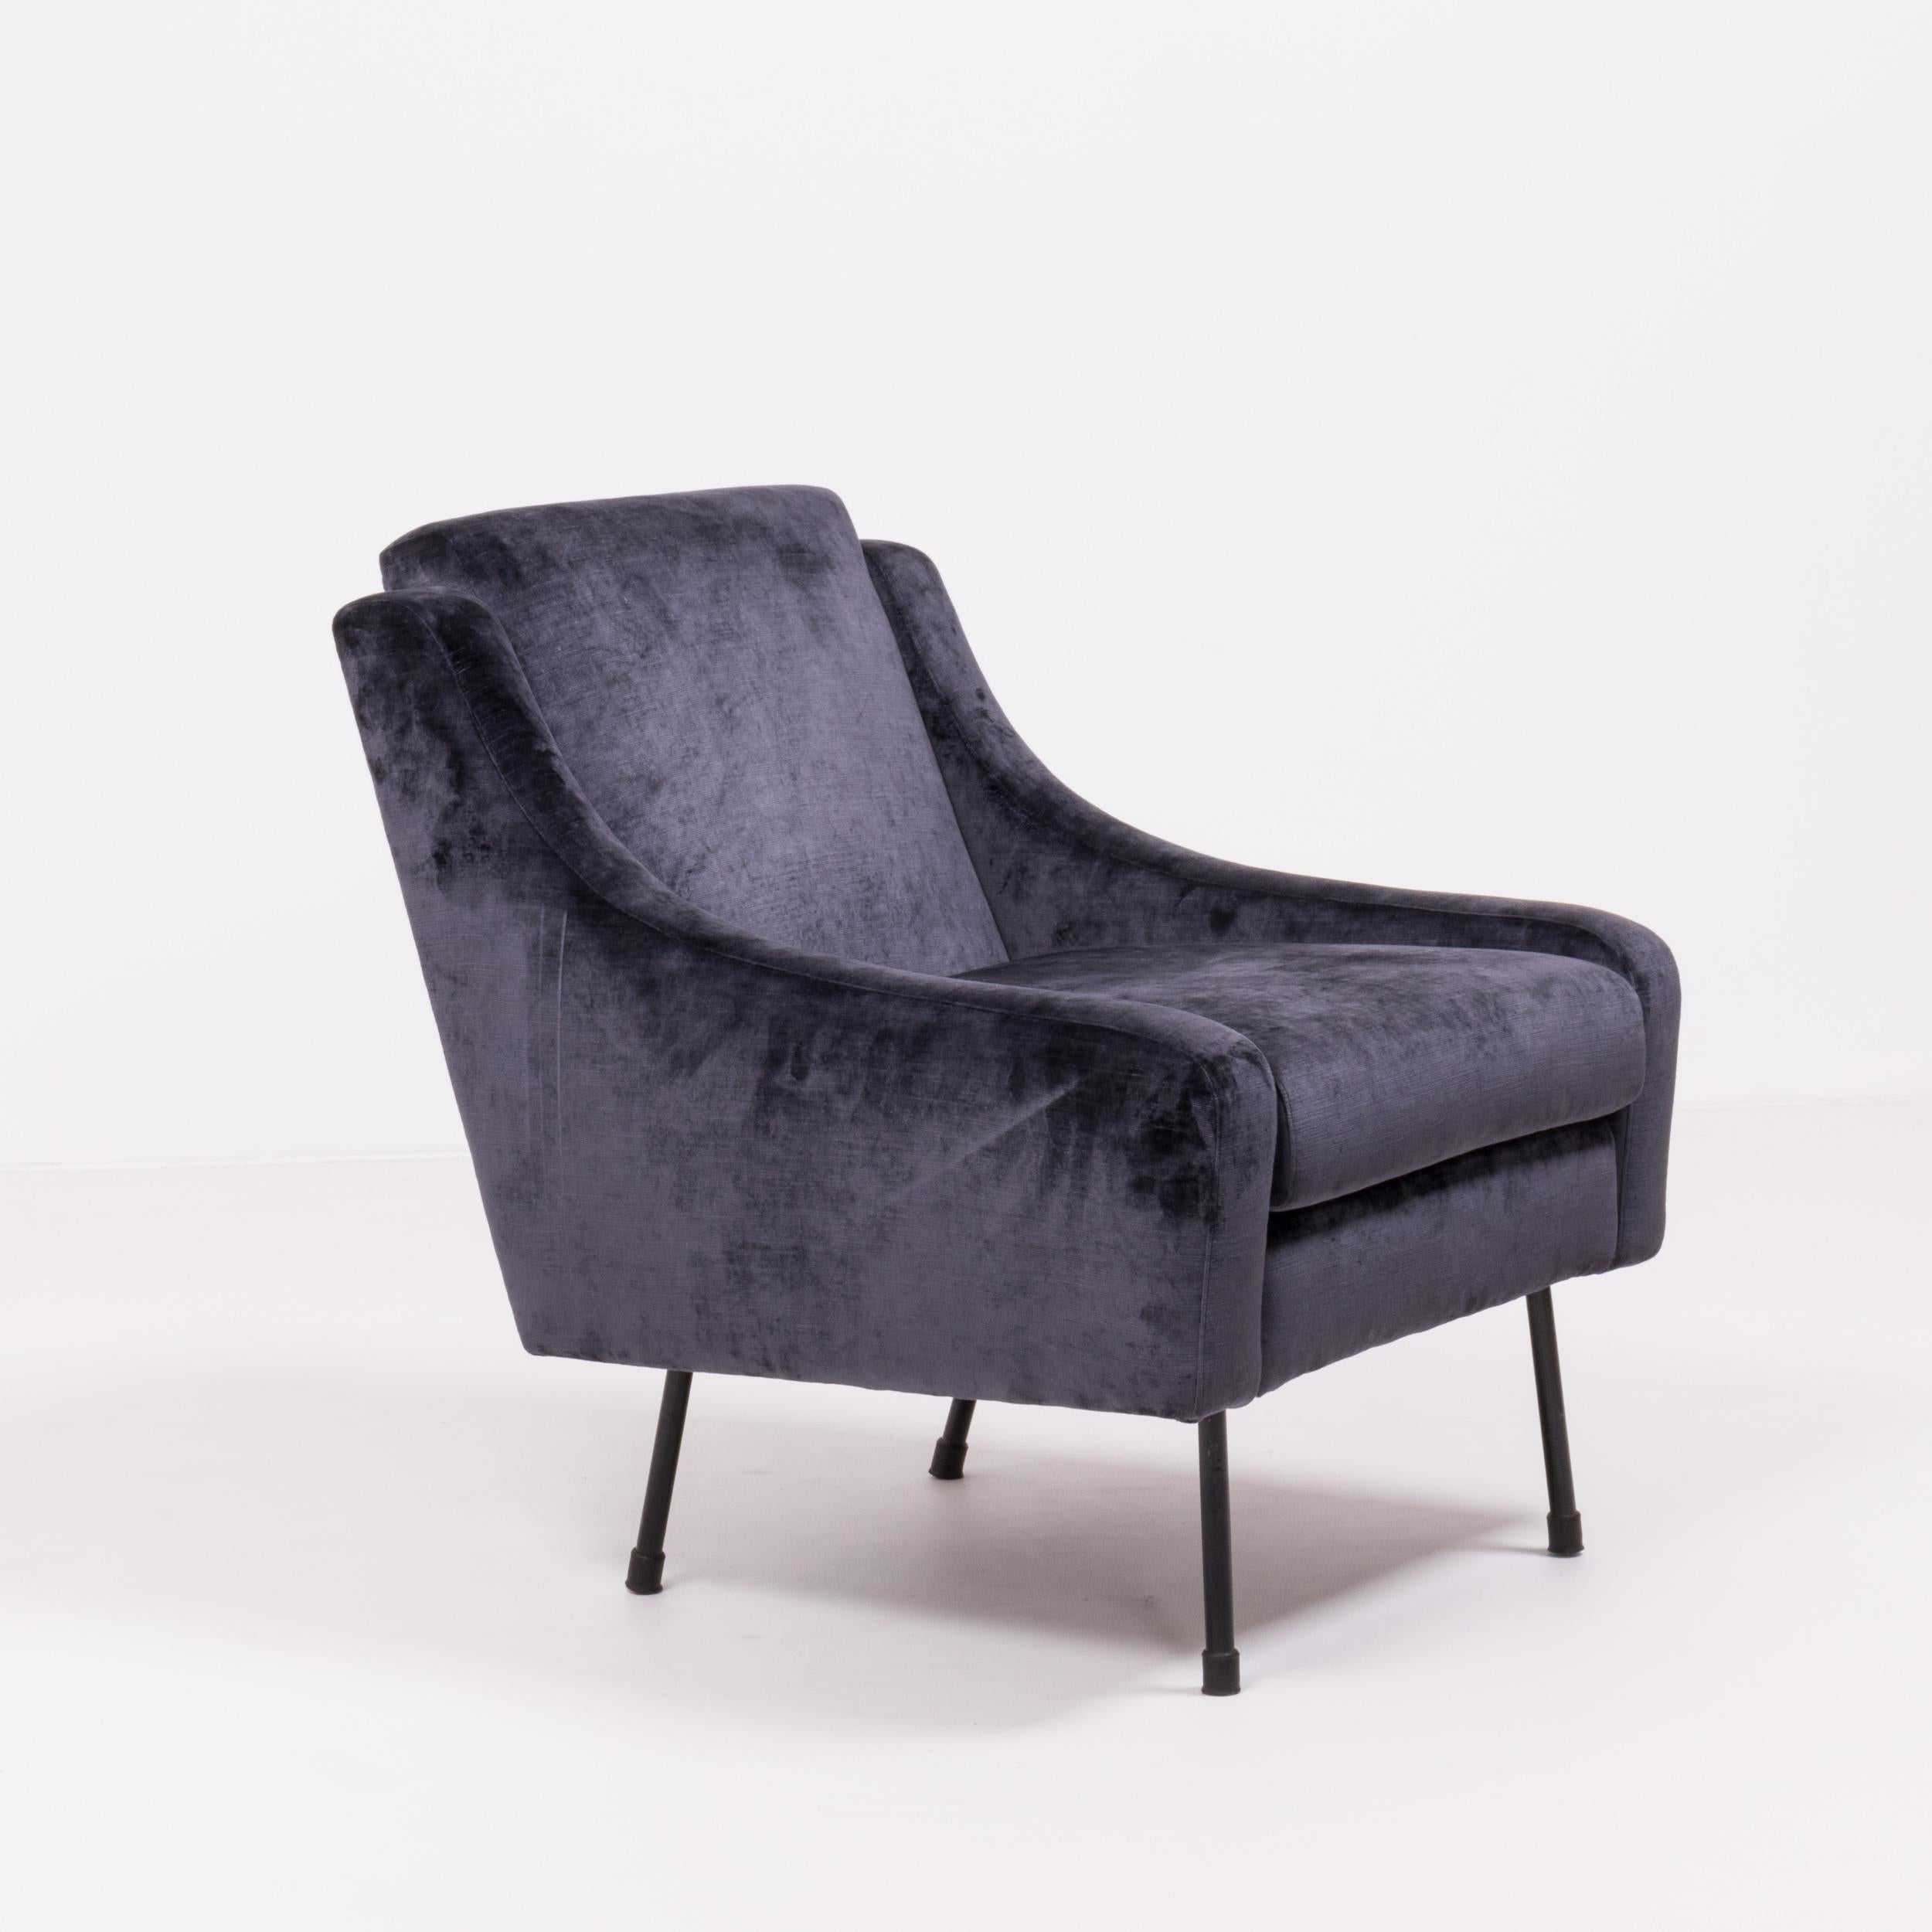 The perfect combination of sleek lines and soft curves, this midcentury armchair is a fantastic example of timeless Mid-Century Modern design.

Fully upholstered in Prussian blue velvet, the chair features a high back and curved arms. The angled